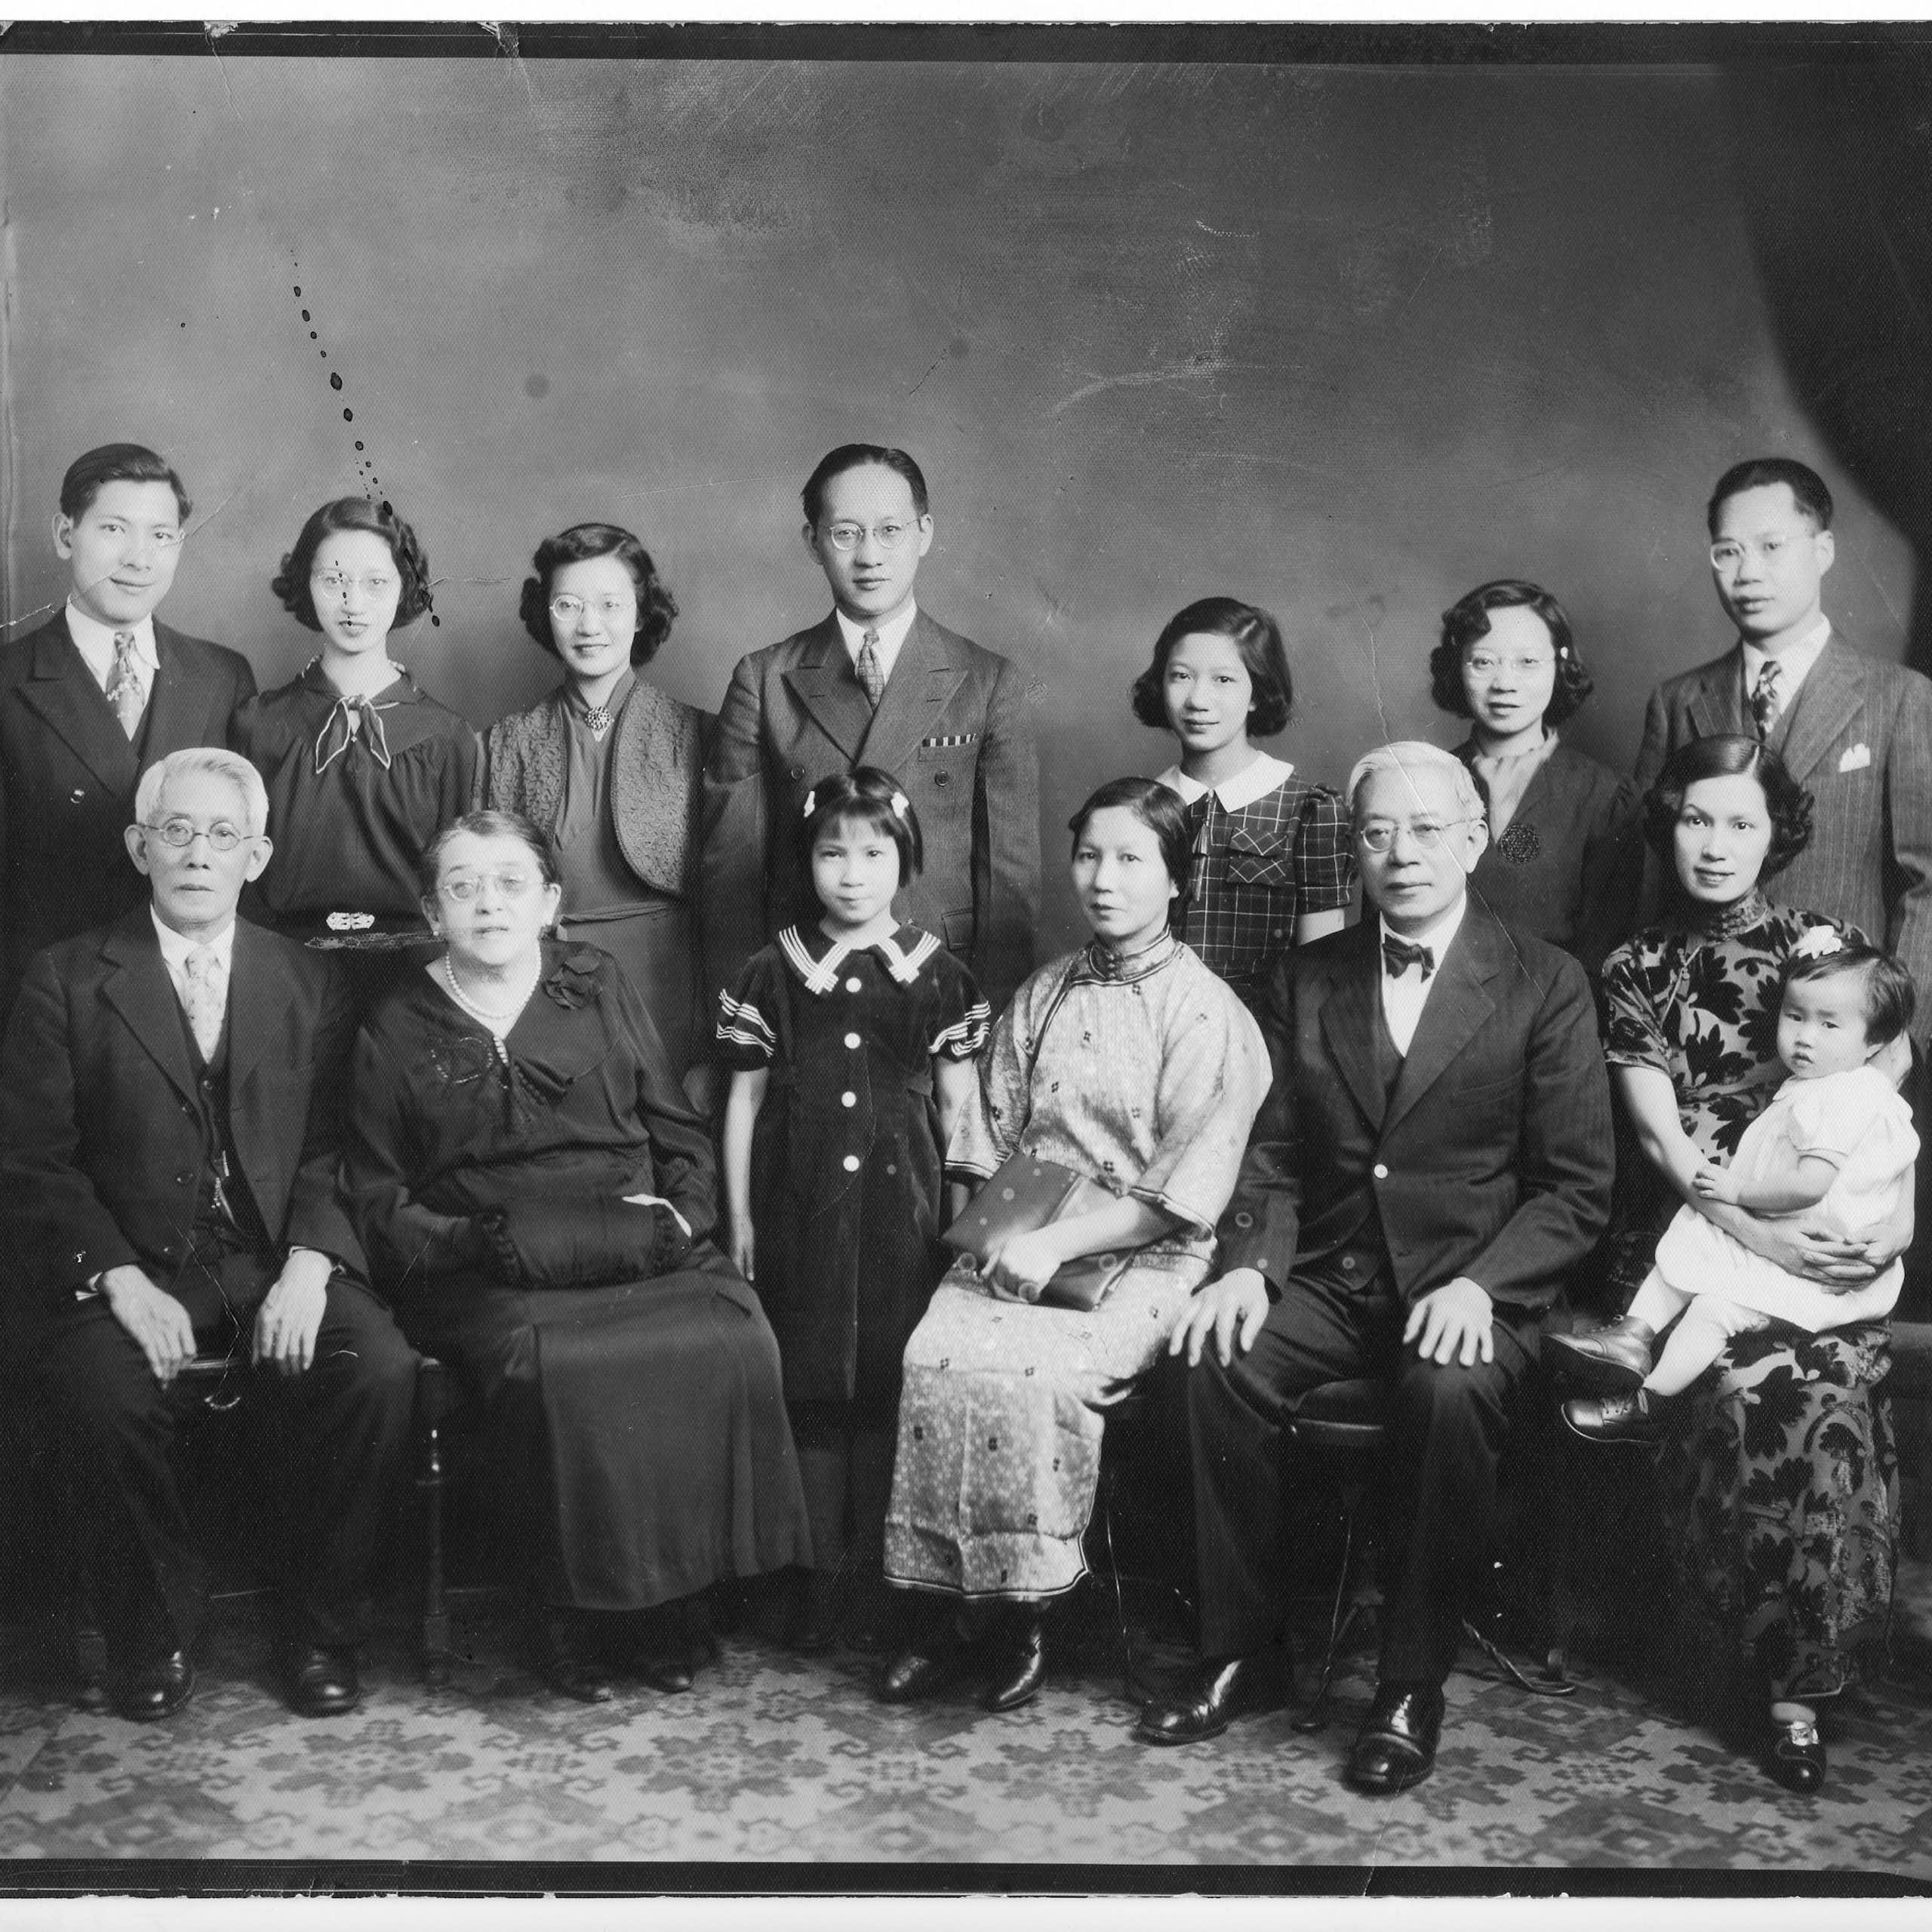 Listen: A 5th generation New Yorker traces her family history and finds the roots of anti-Asian violence – and Asian resistance